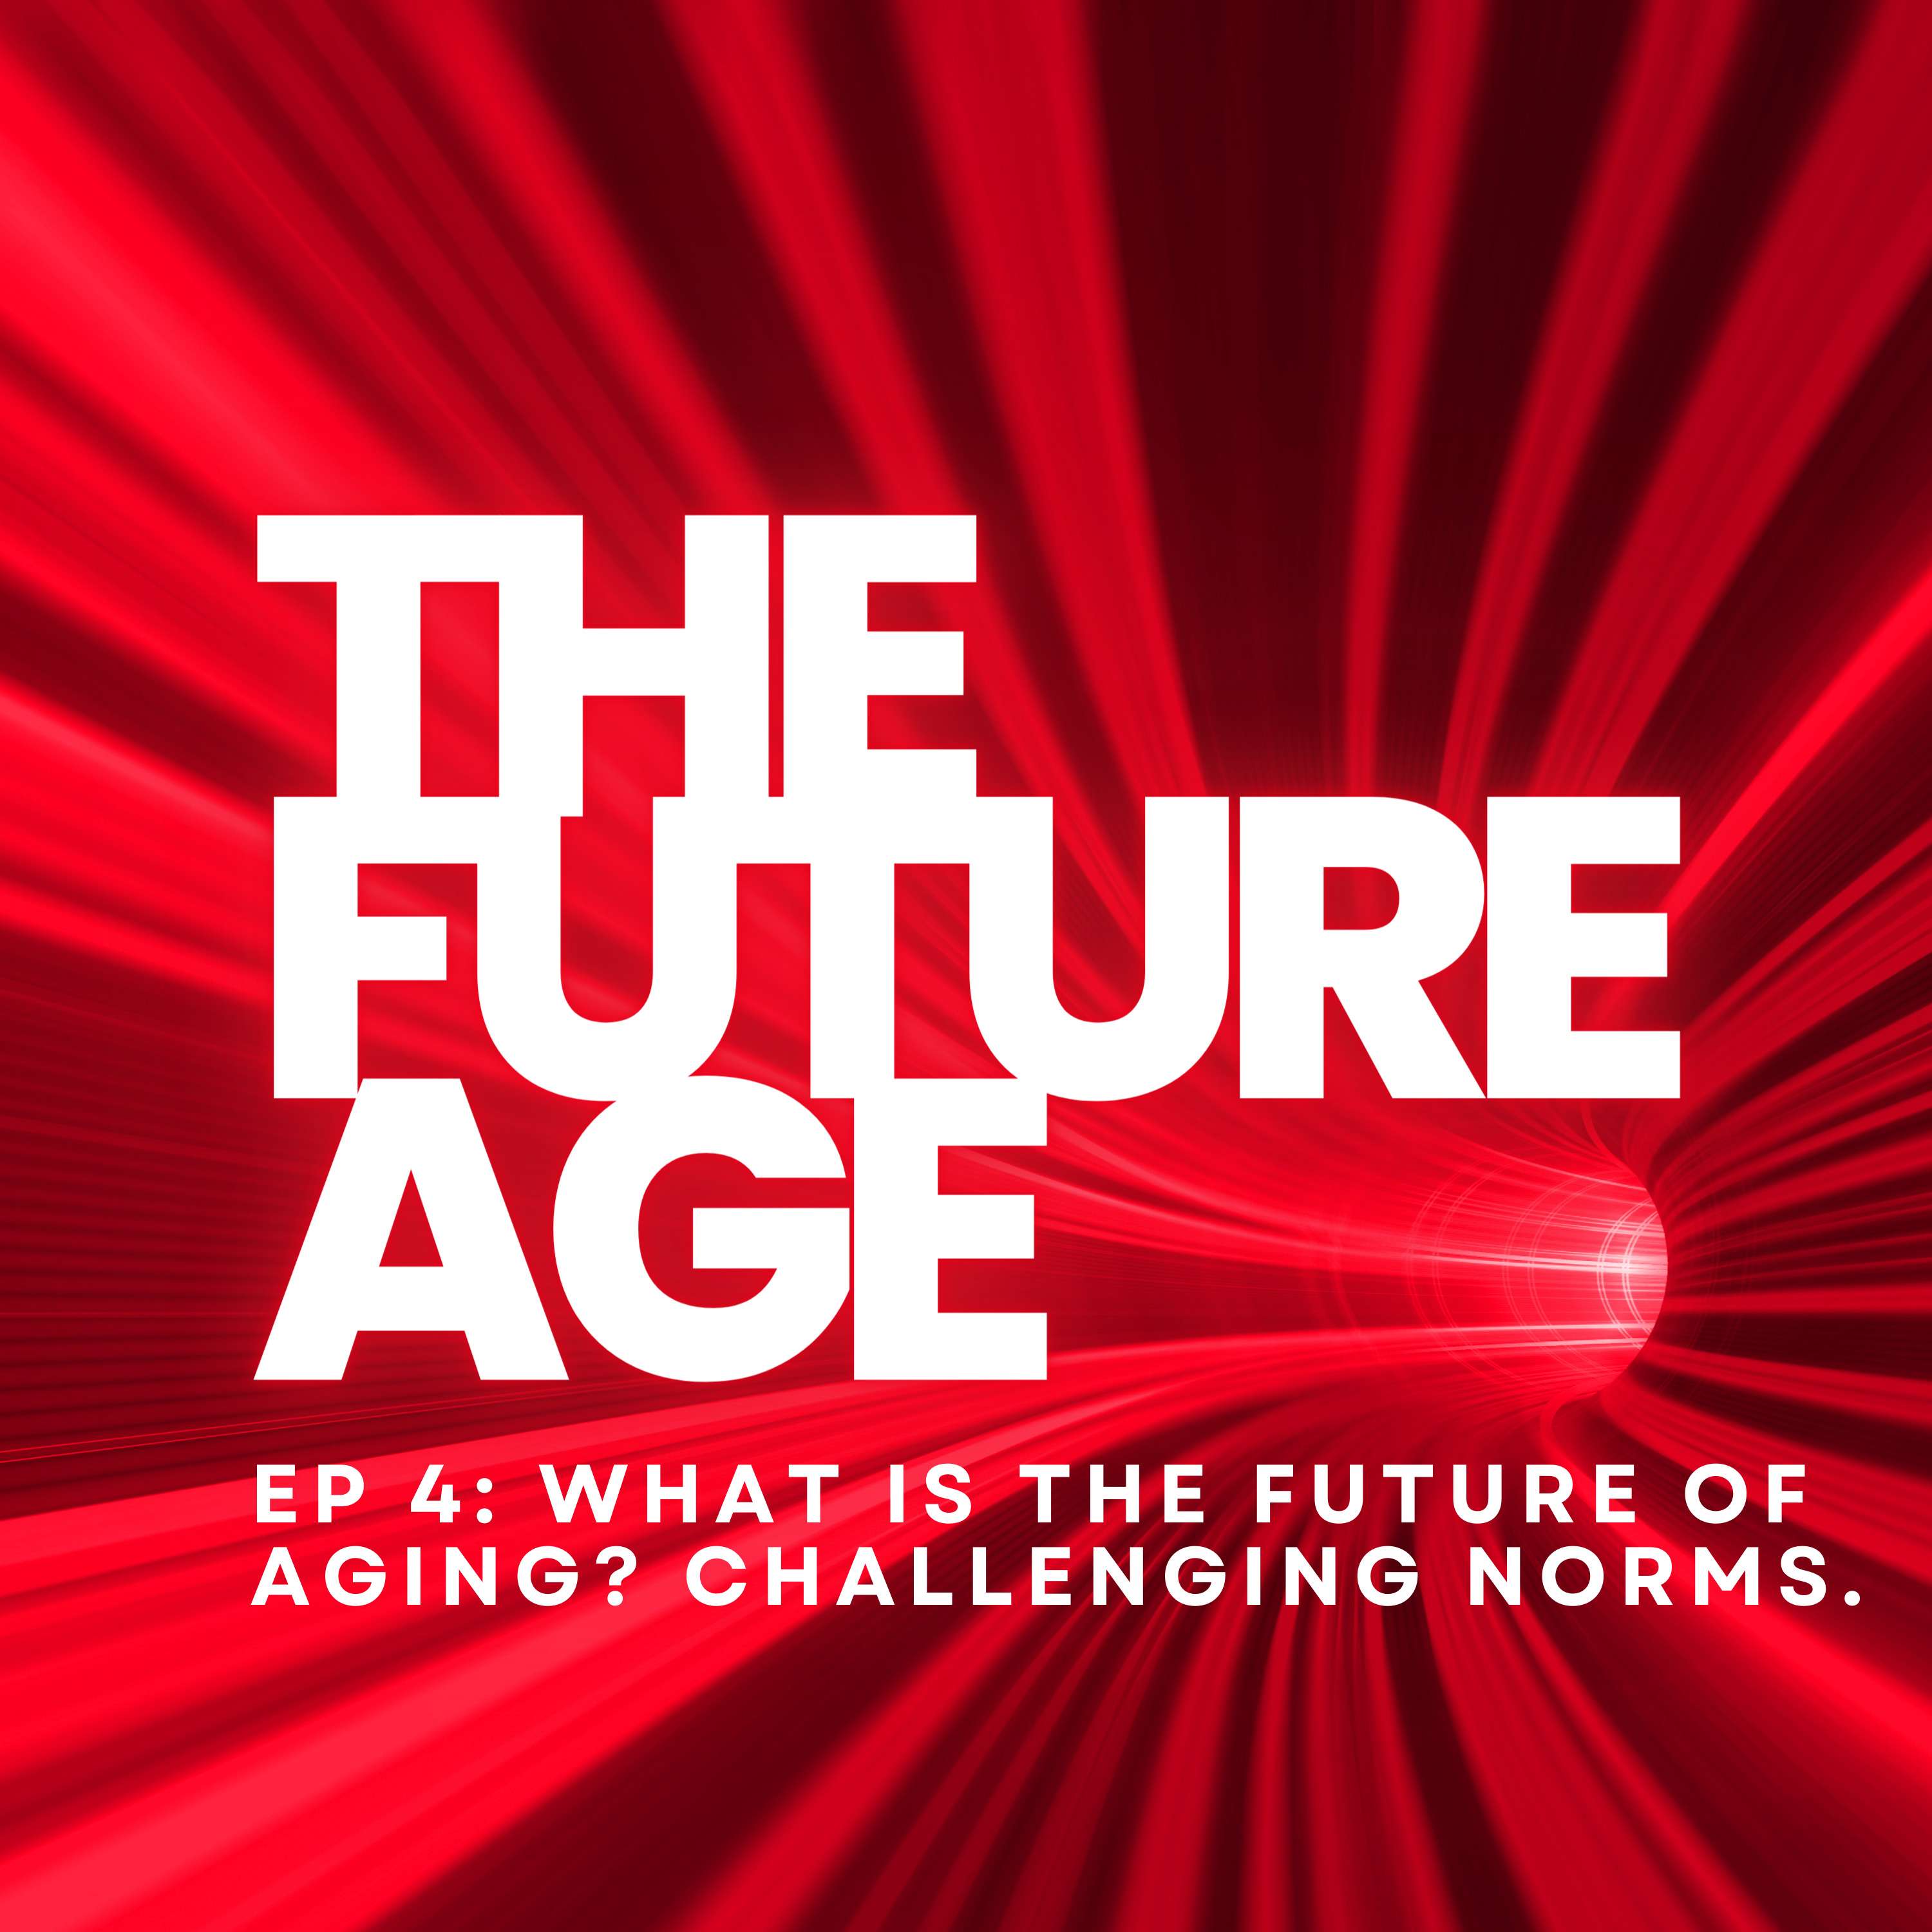 What is the Future of Aging? Challenging Norms